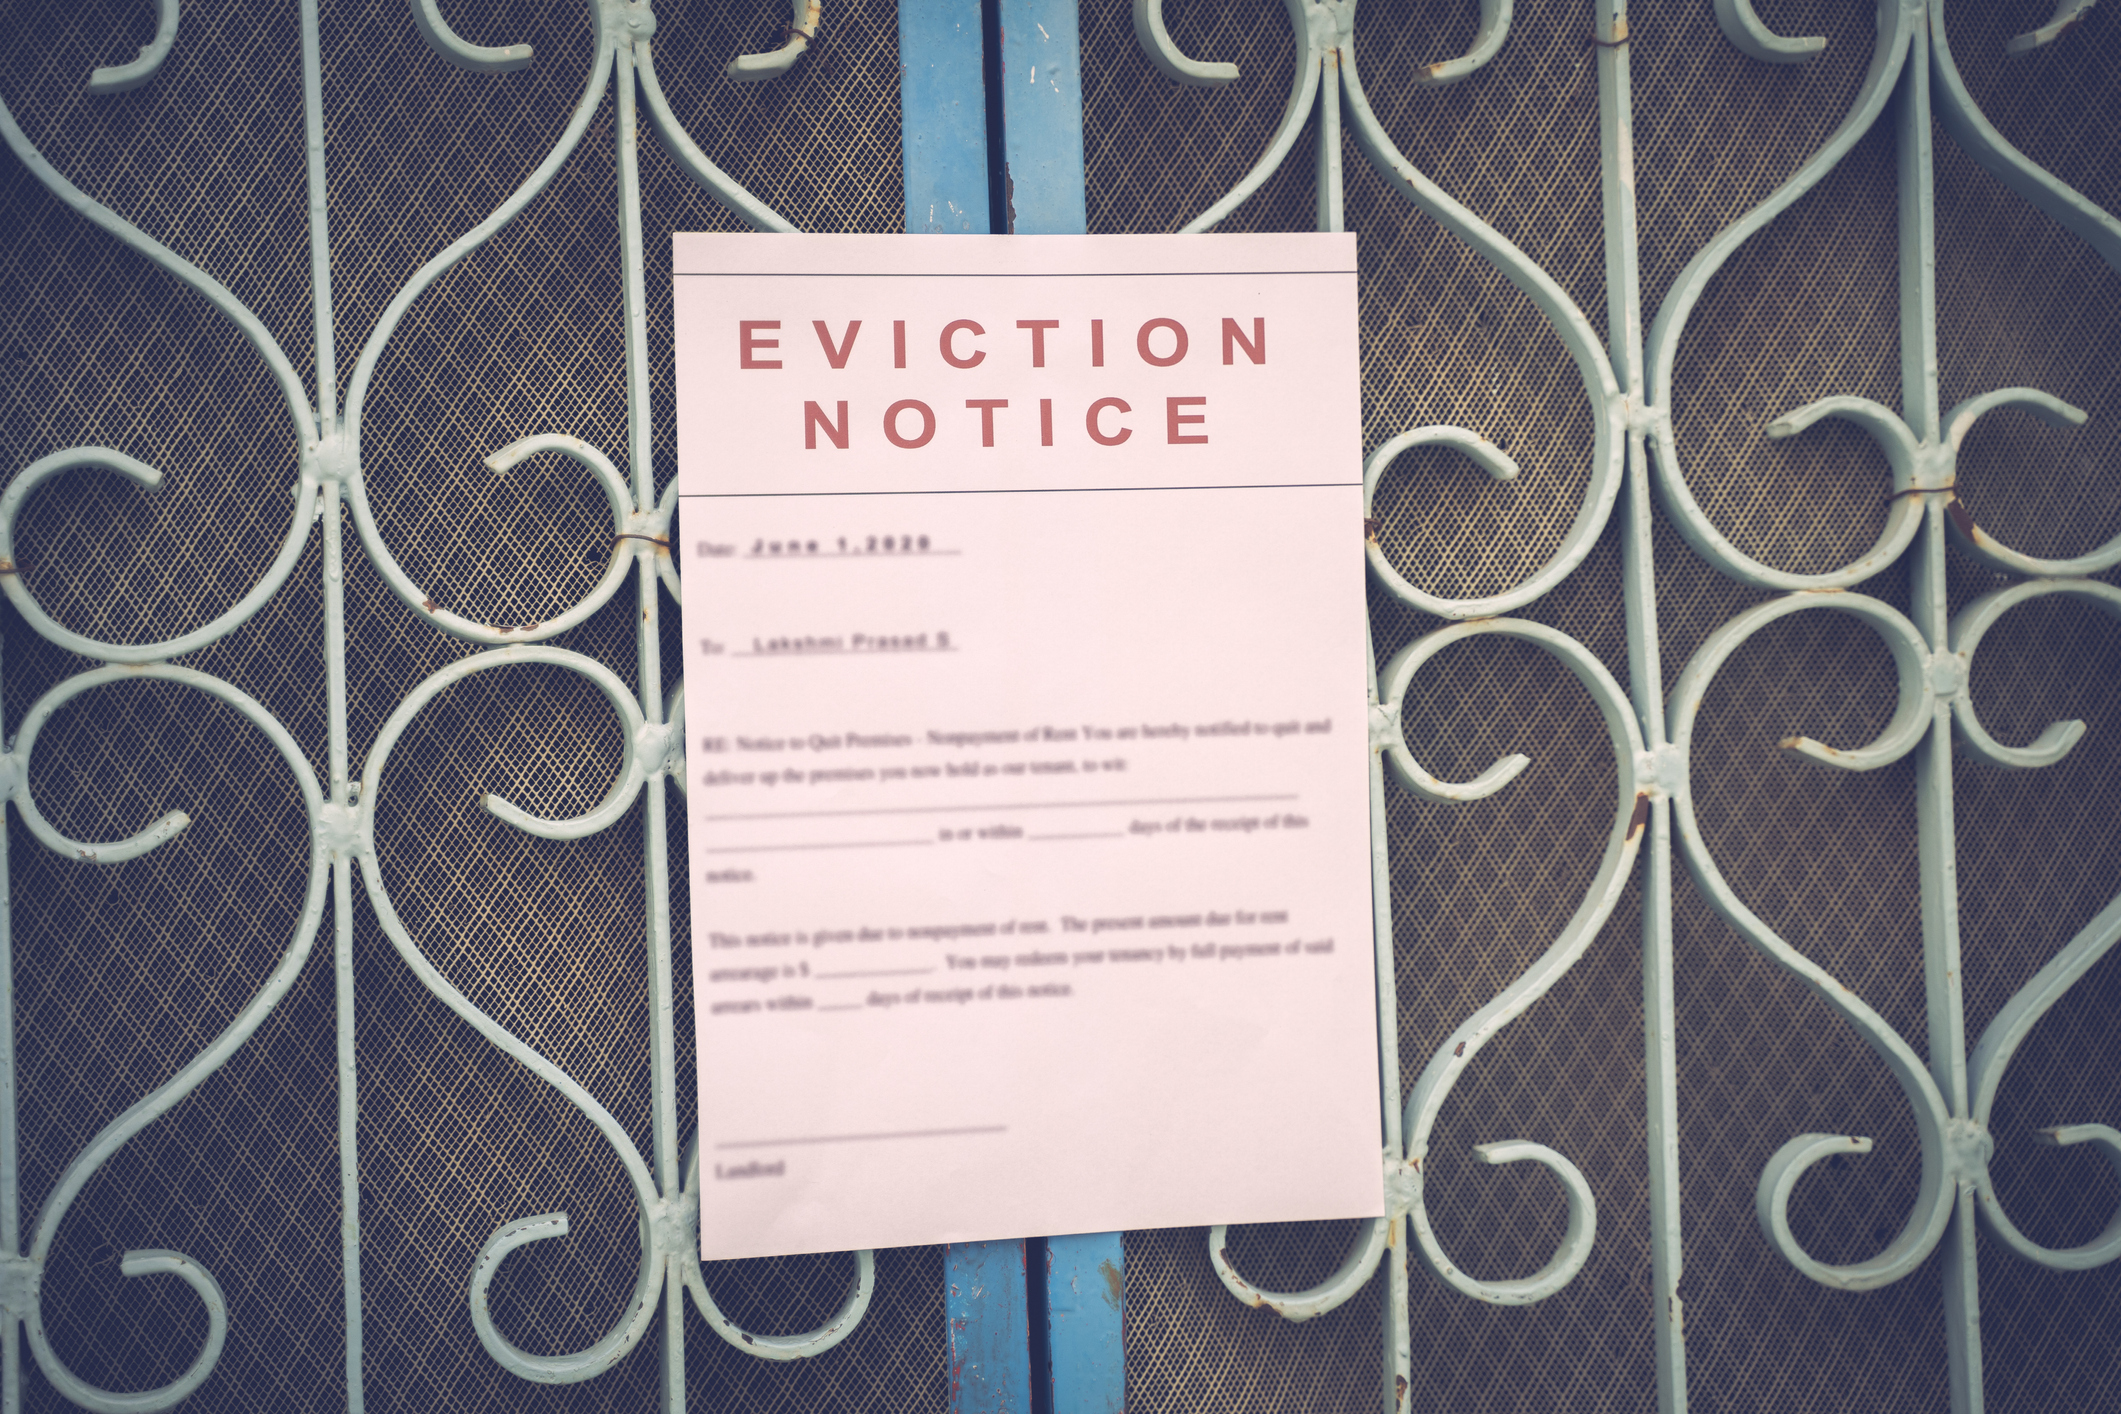 Cdc Eviction Ban Stops Only Physical Tenant Removal Florida Realtors